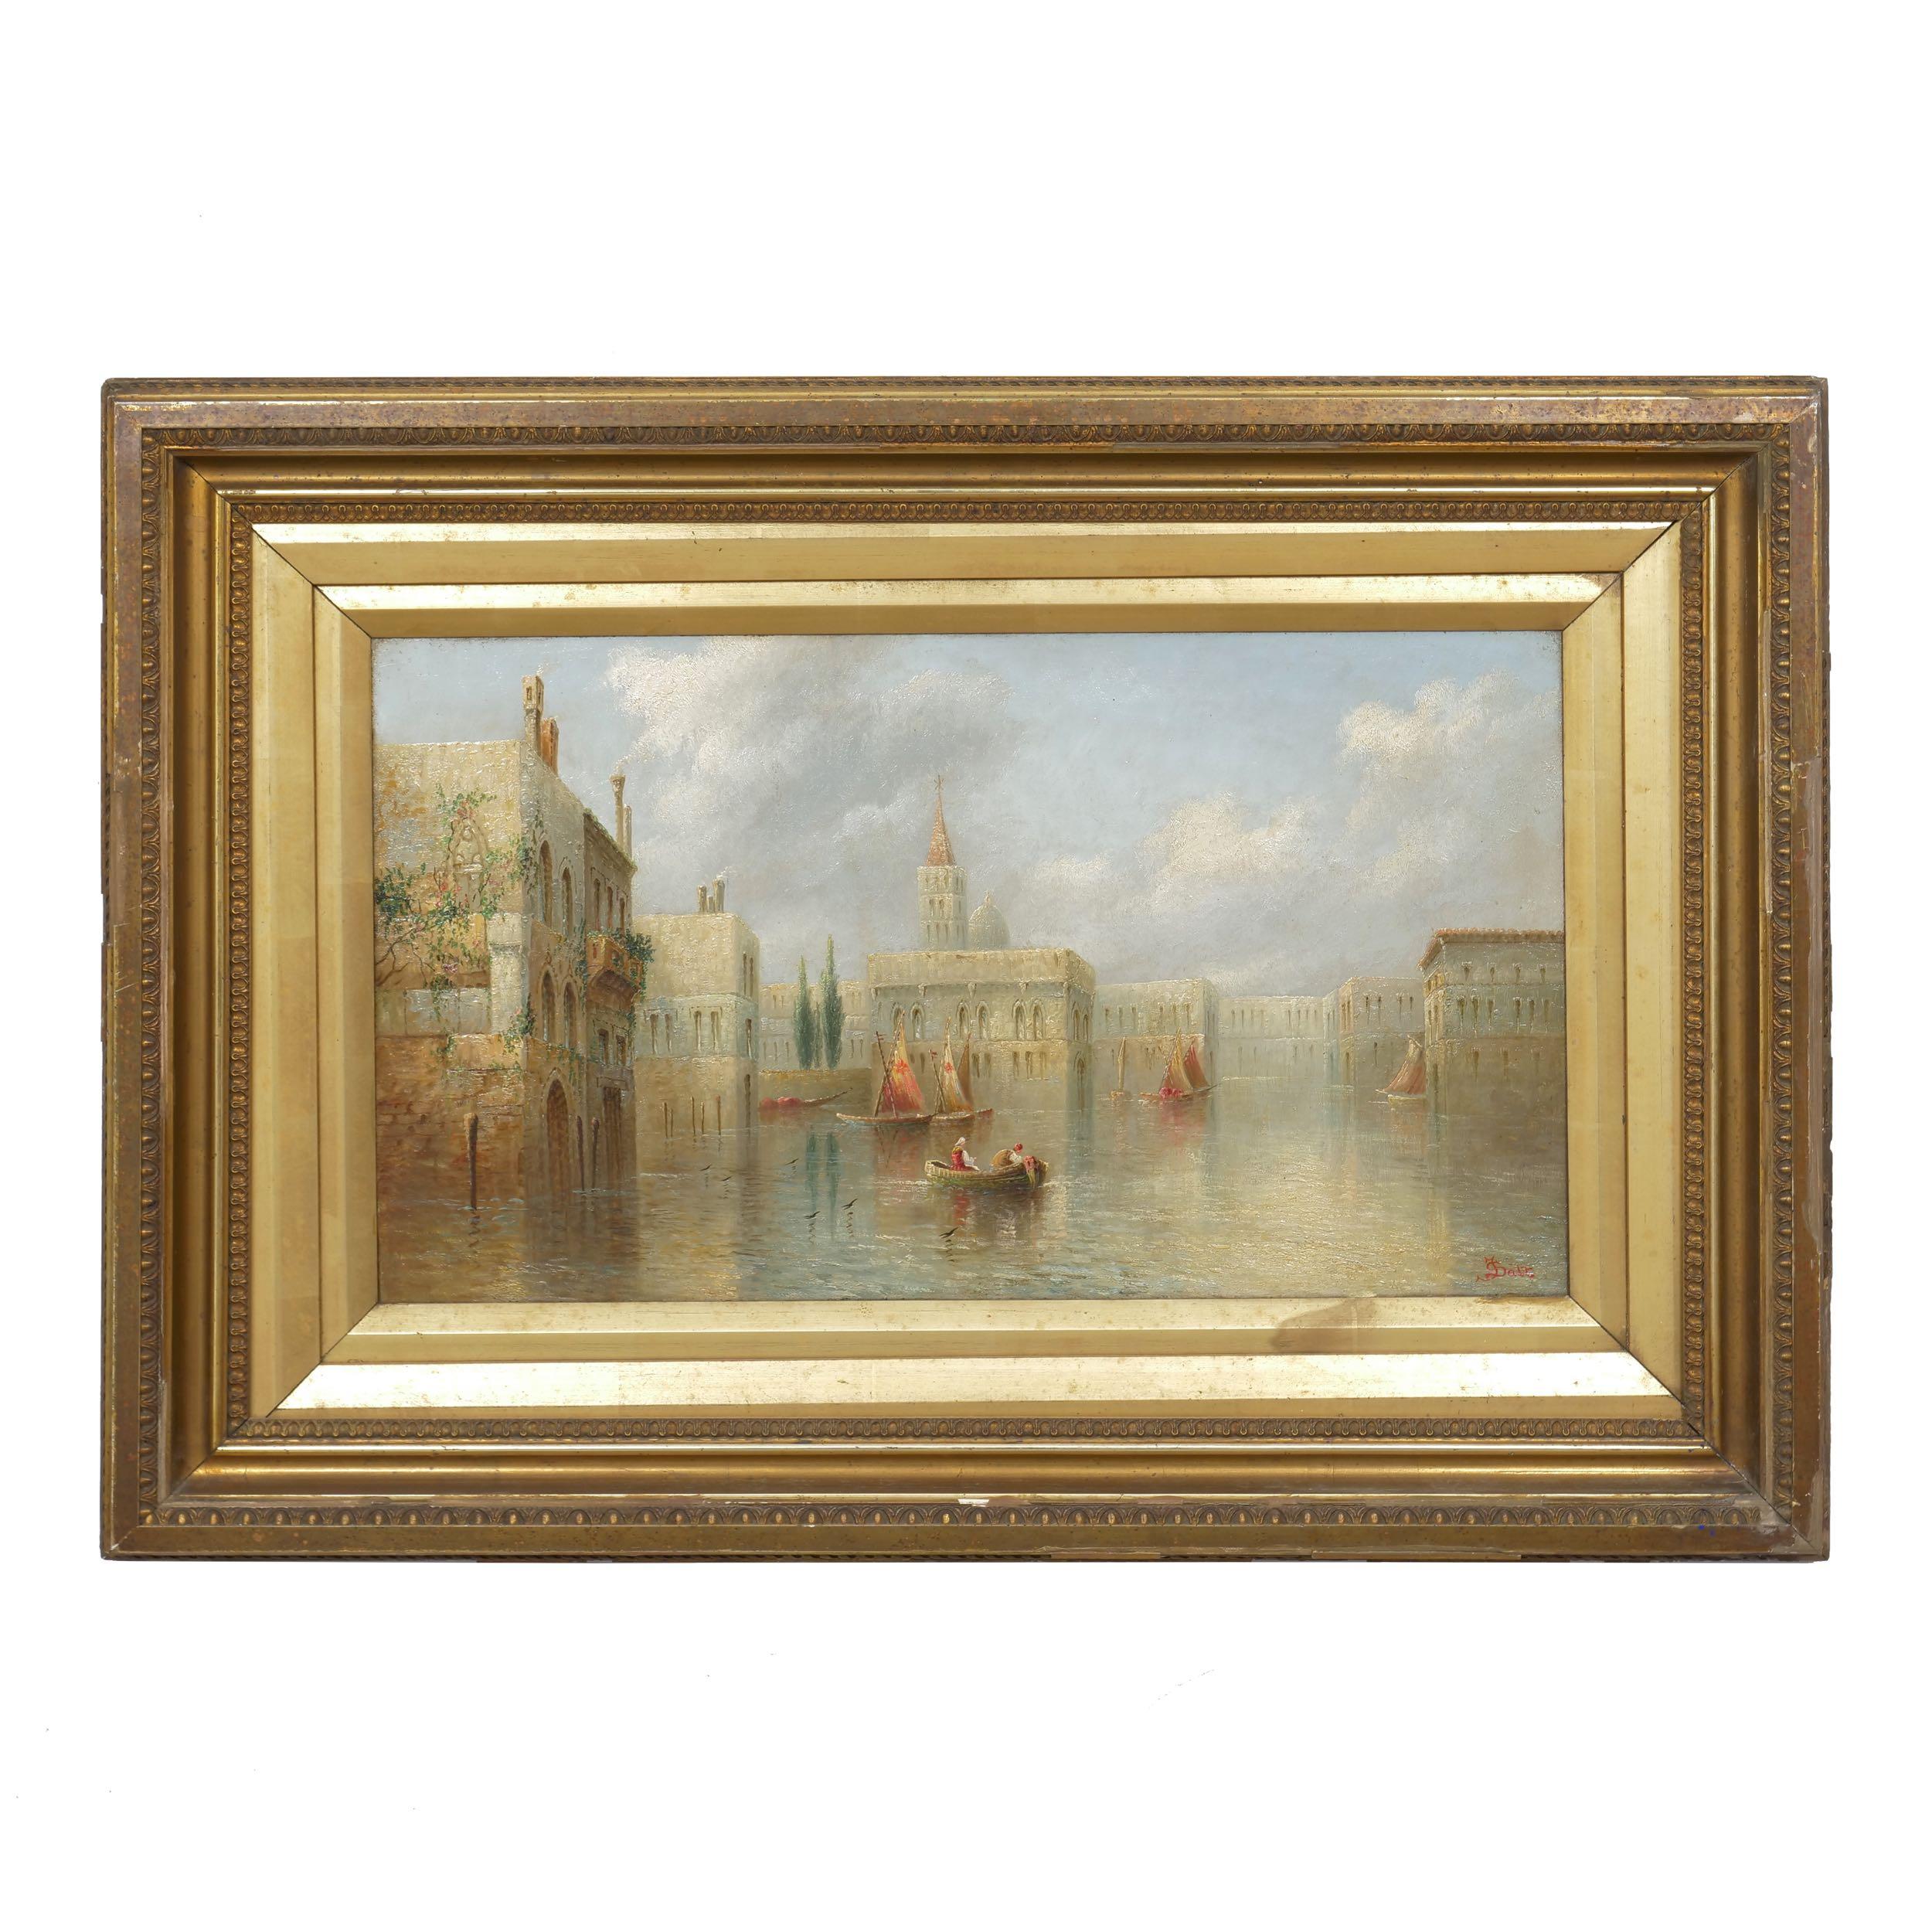 A vivid work in his typical translucent and nearly pastel palette, James Salt specialized in capriccio paintings, specifically capturing imagined views of Venice. His blues throughout the length of the canal grade gently into the bokeh of the